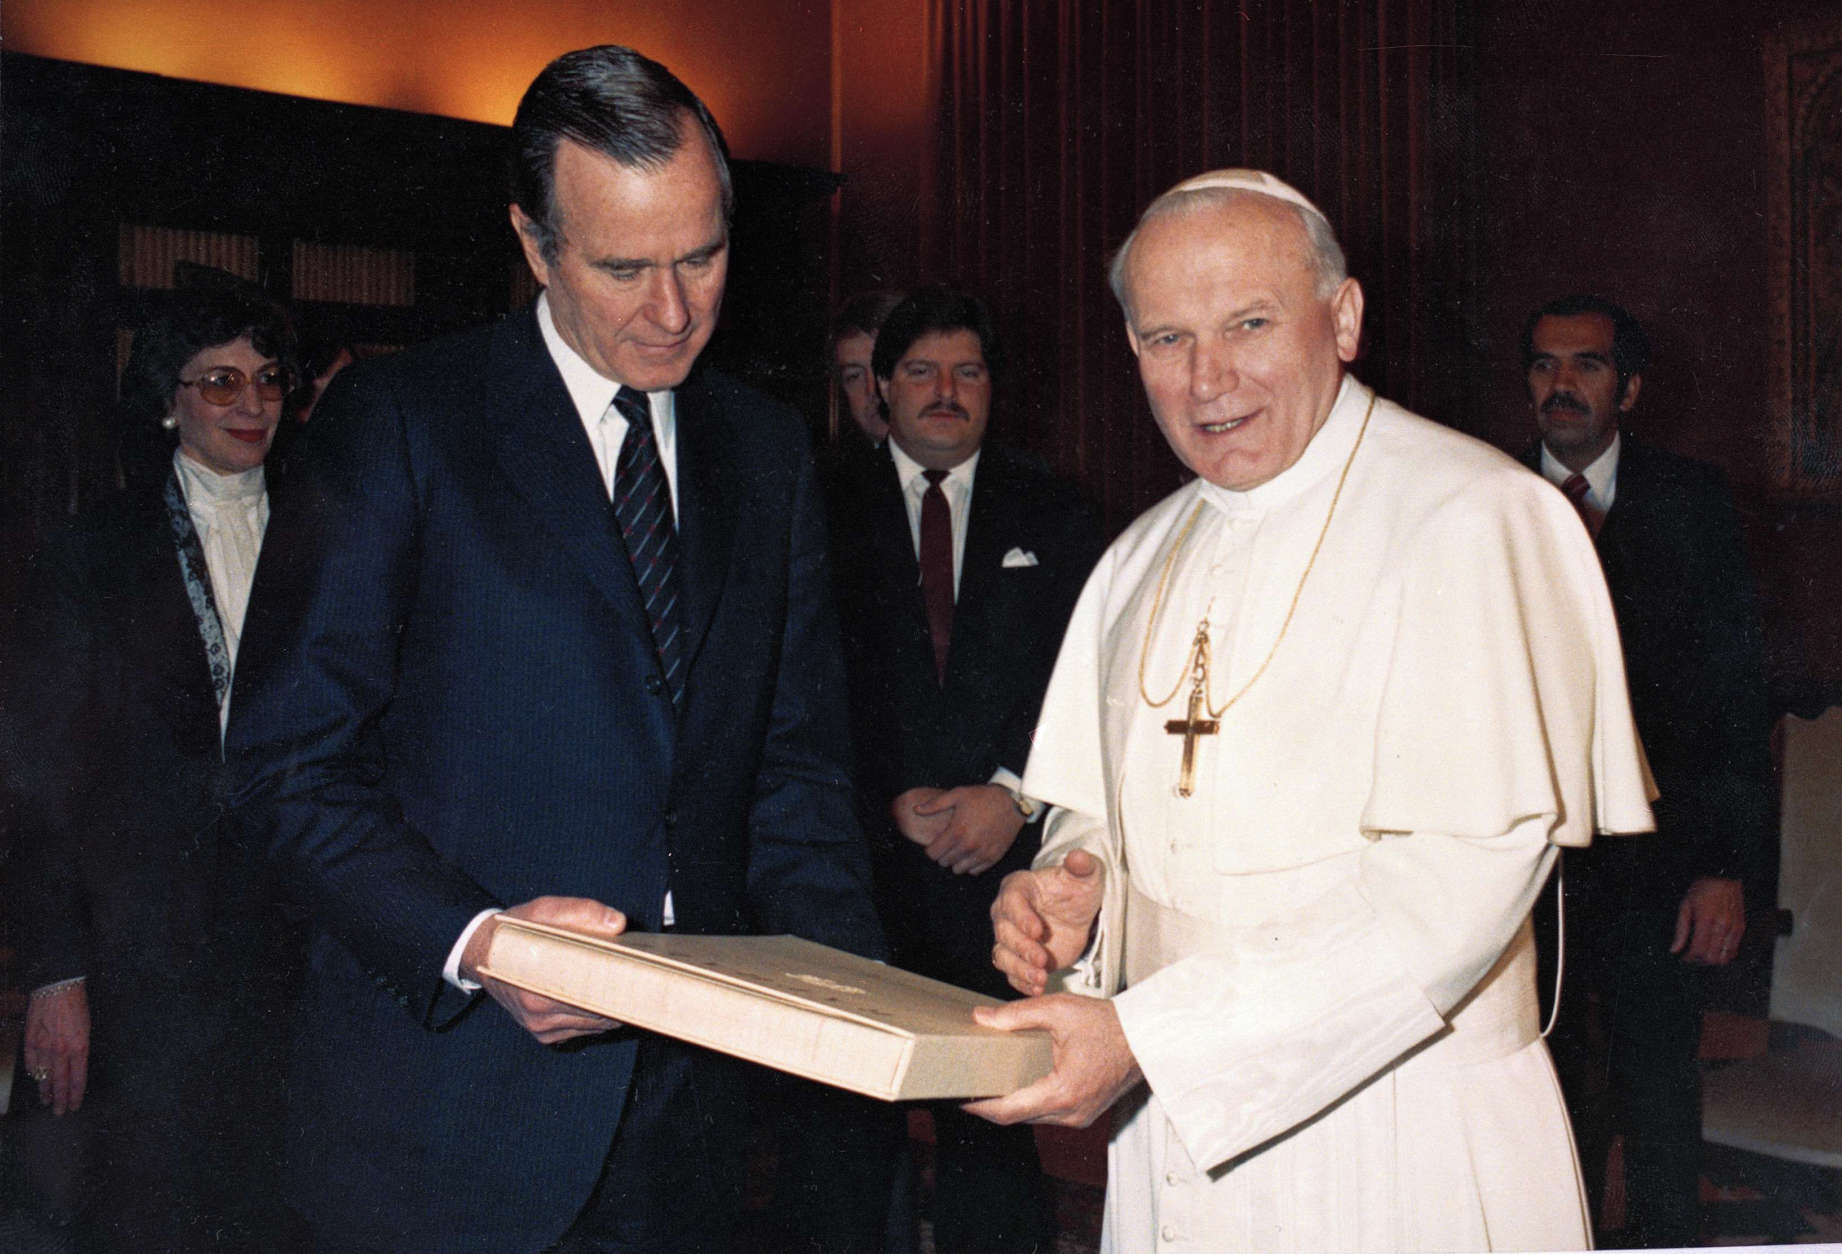 Pope John Paul II hands U.S. Vice President George Bush a book during their meeting in Vatican City, Feb. 15, 1984. 

In 1984, the United States and the Vatican established full diplomatic relations for the first time in more than a century. (AP Photo/Arturo Mari)